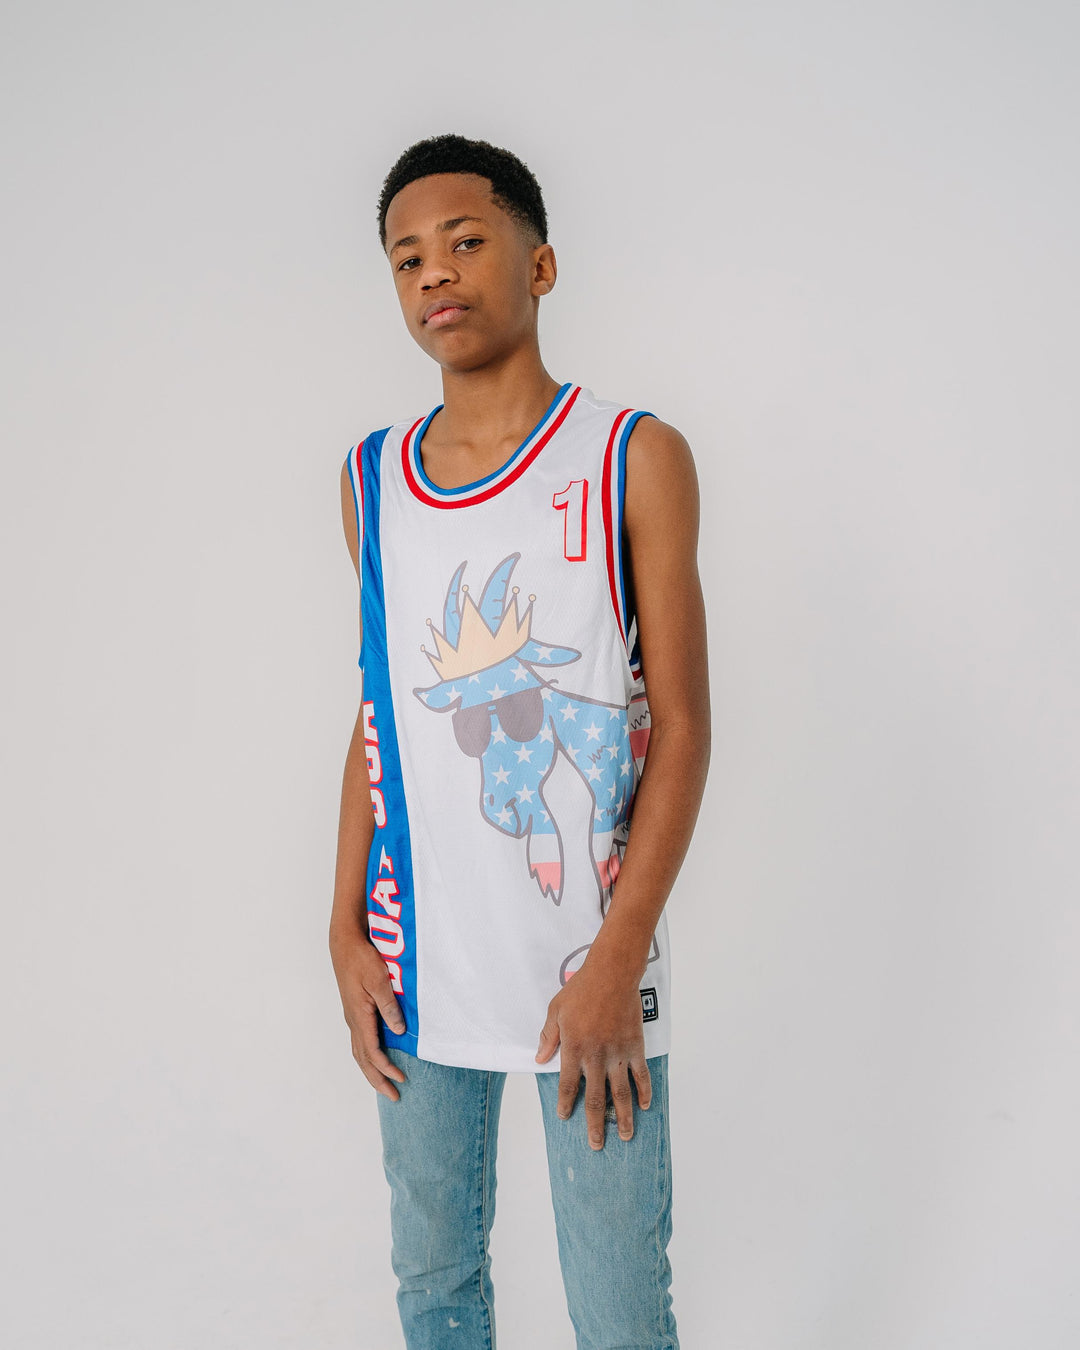 Boy wearing red, white and blue jersey with large American flag goat that wraps around